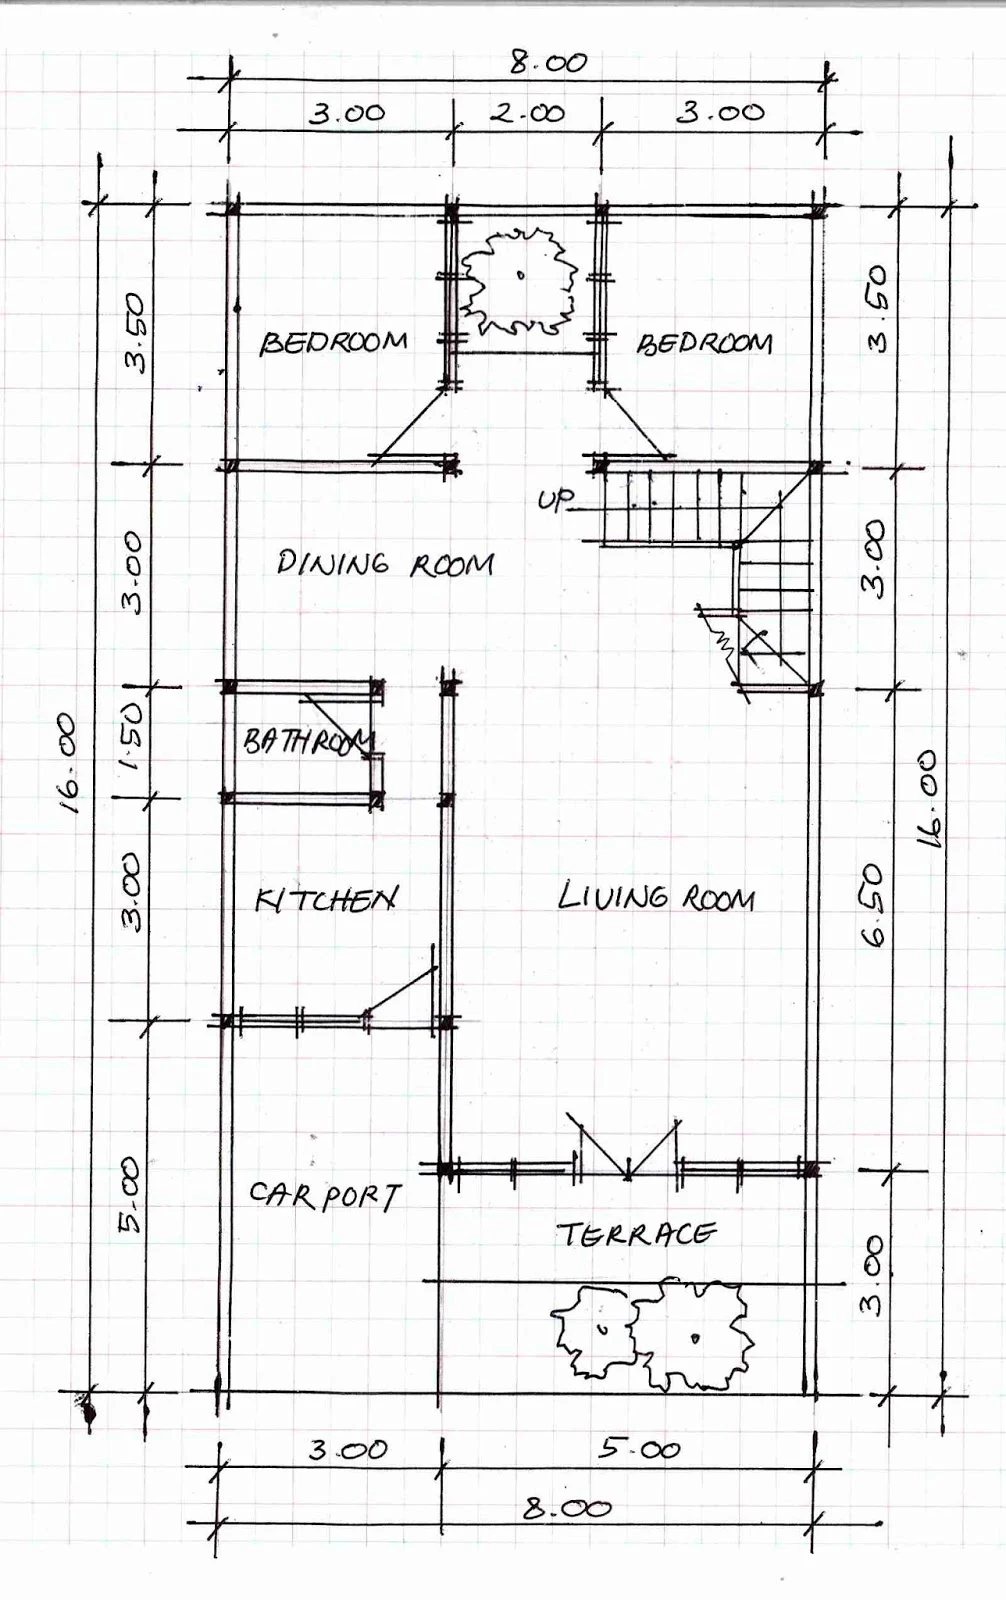 house plans for you - plans, image, design and about house